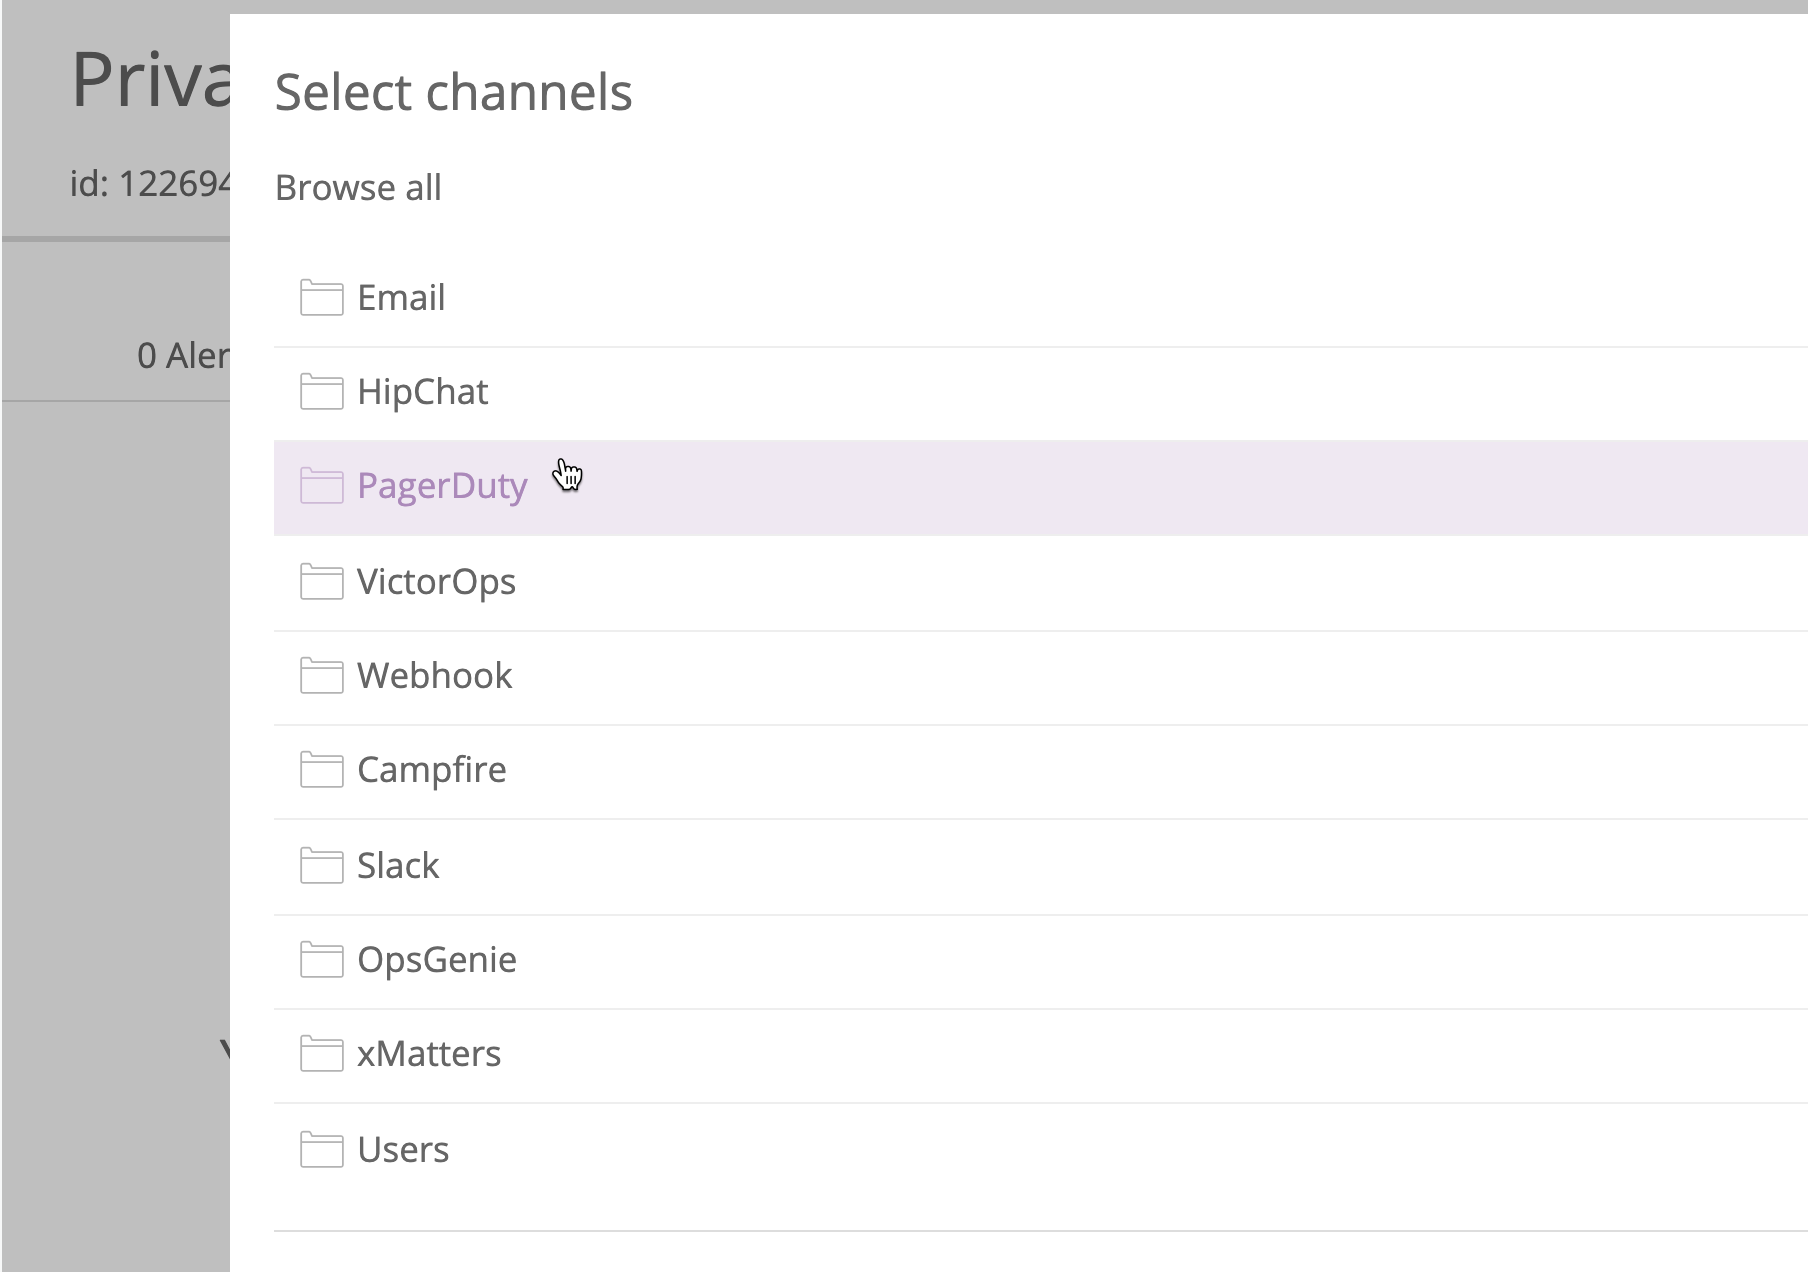 "Select channels" example screenshot